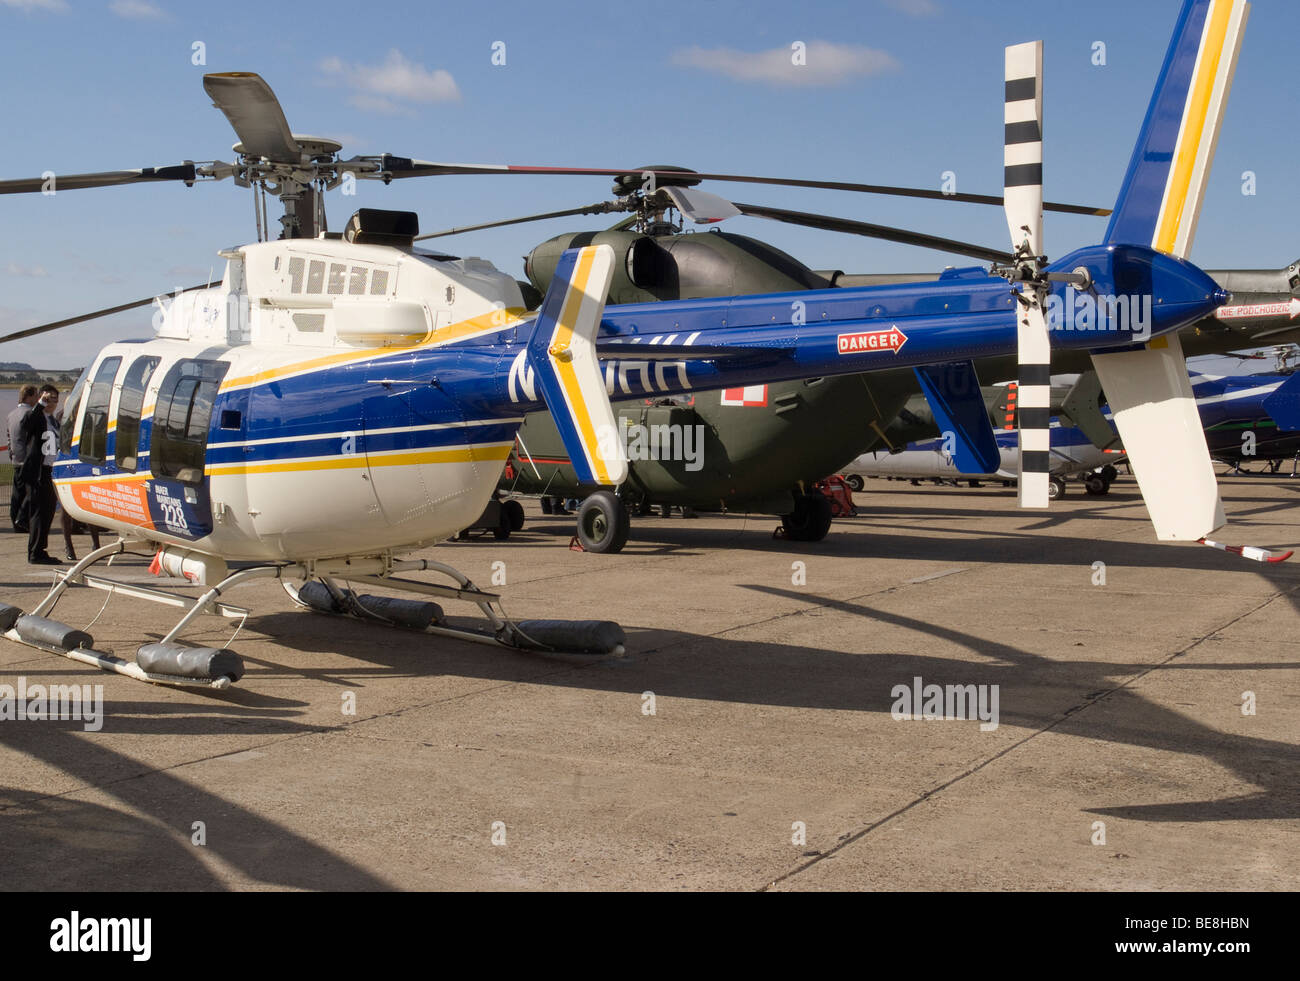 Bell helicopters 407 helicopter N120HH at Helitech Trade Show Duxford Aerodrome cambidgeshire England United Kingdom UK Stock Photo